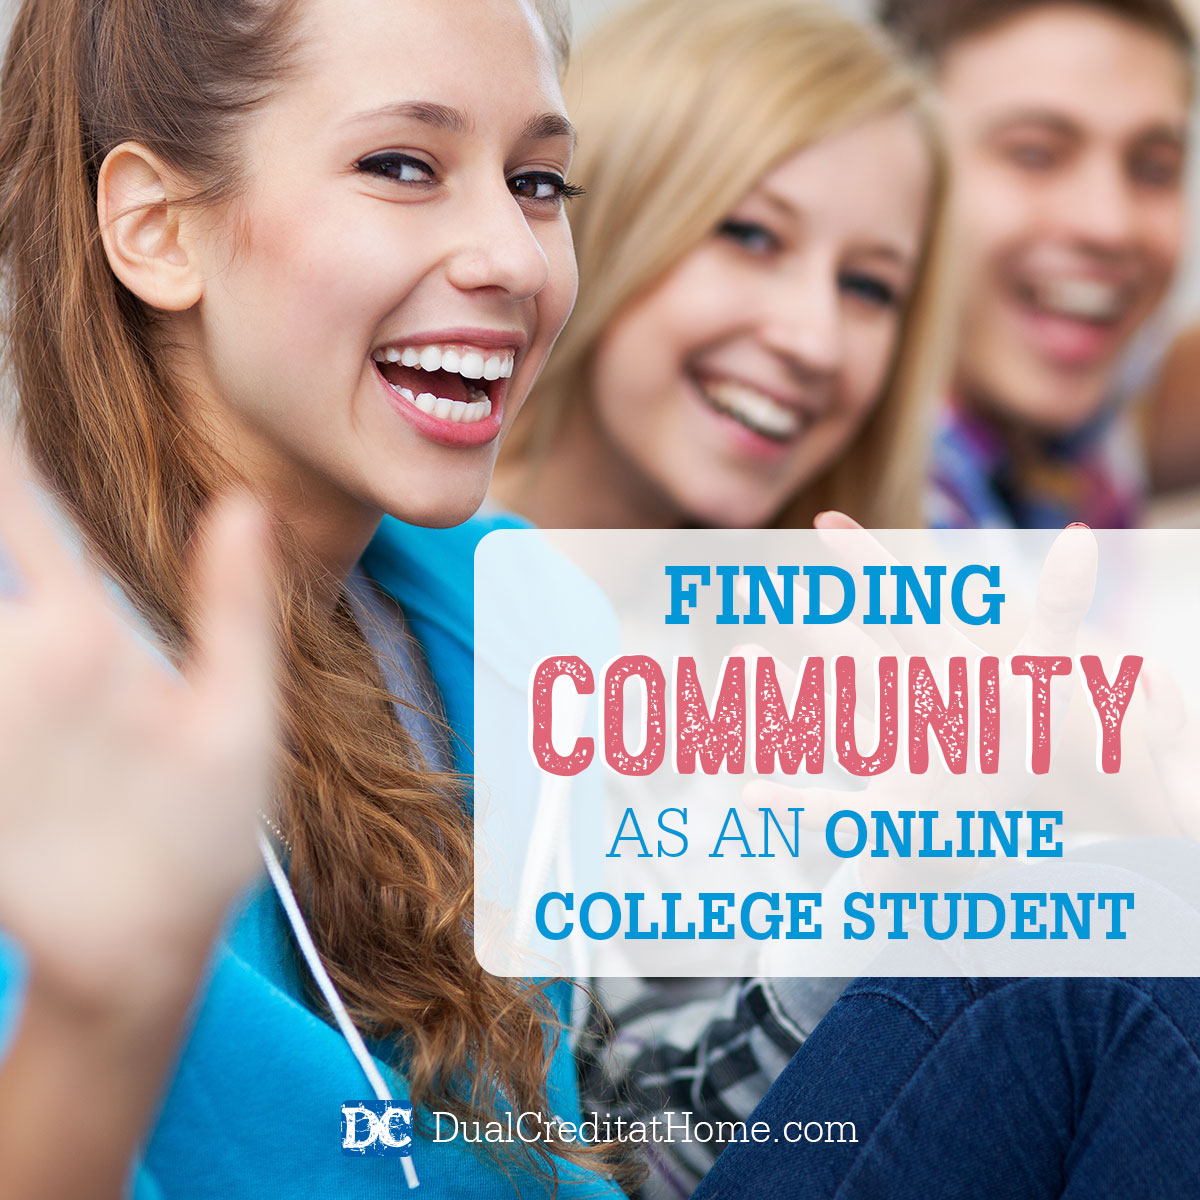 Finding Community as an Online College Student